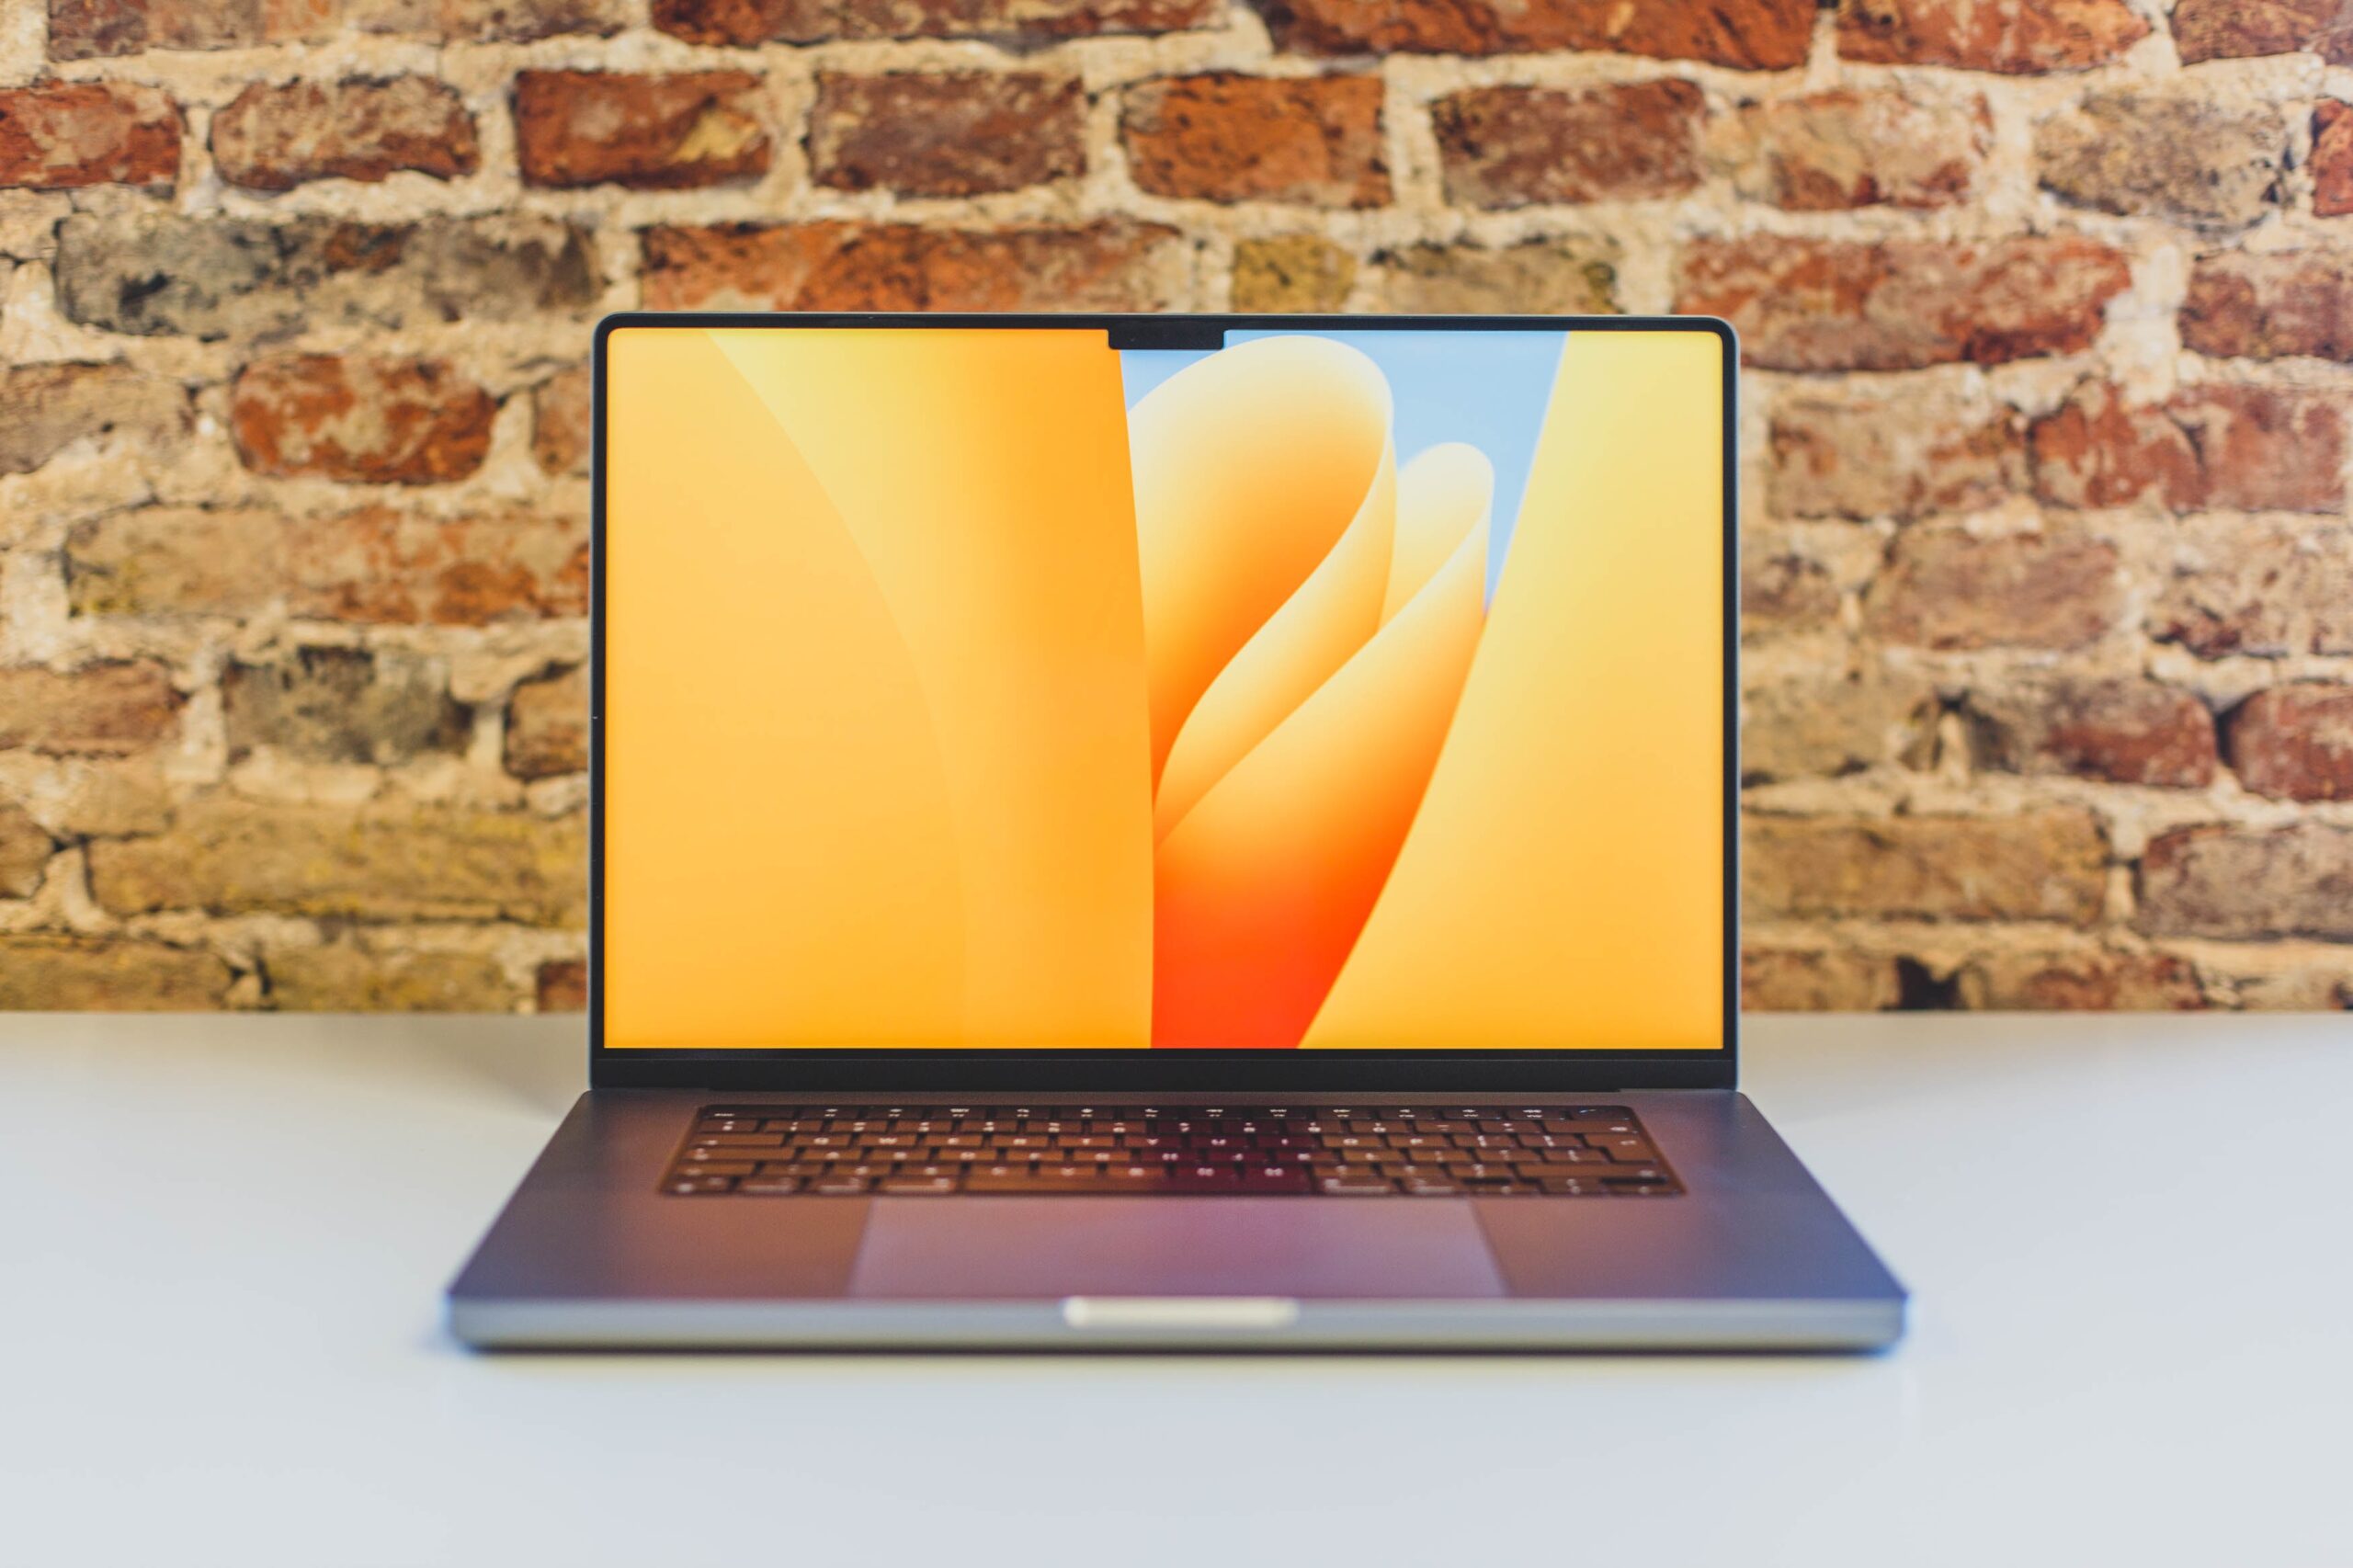 MacBook Pro 16” M2 Max: Specs and Review